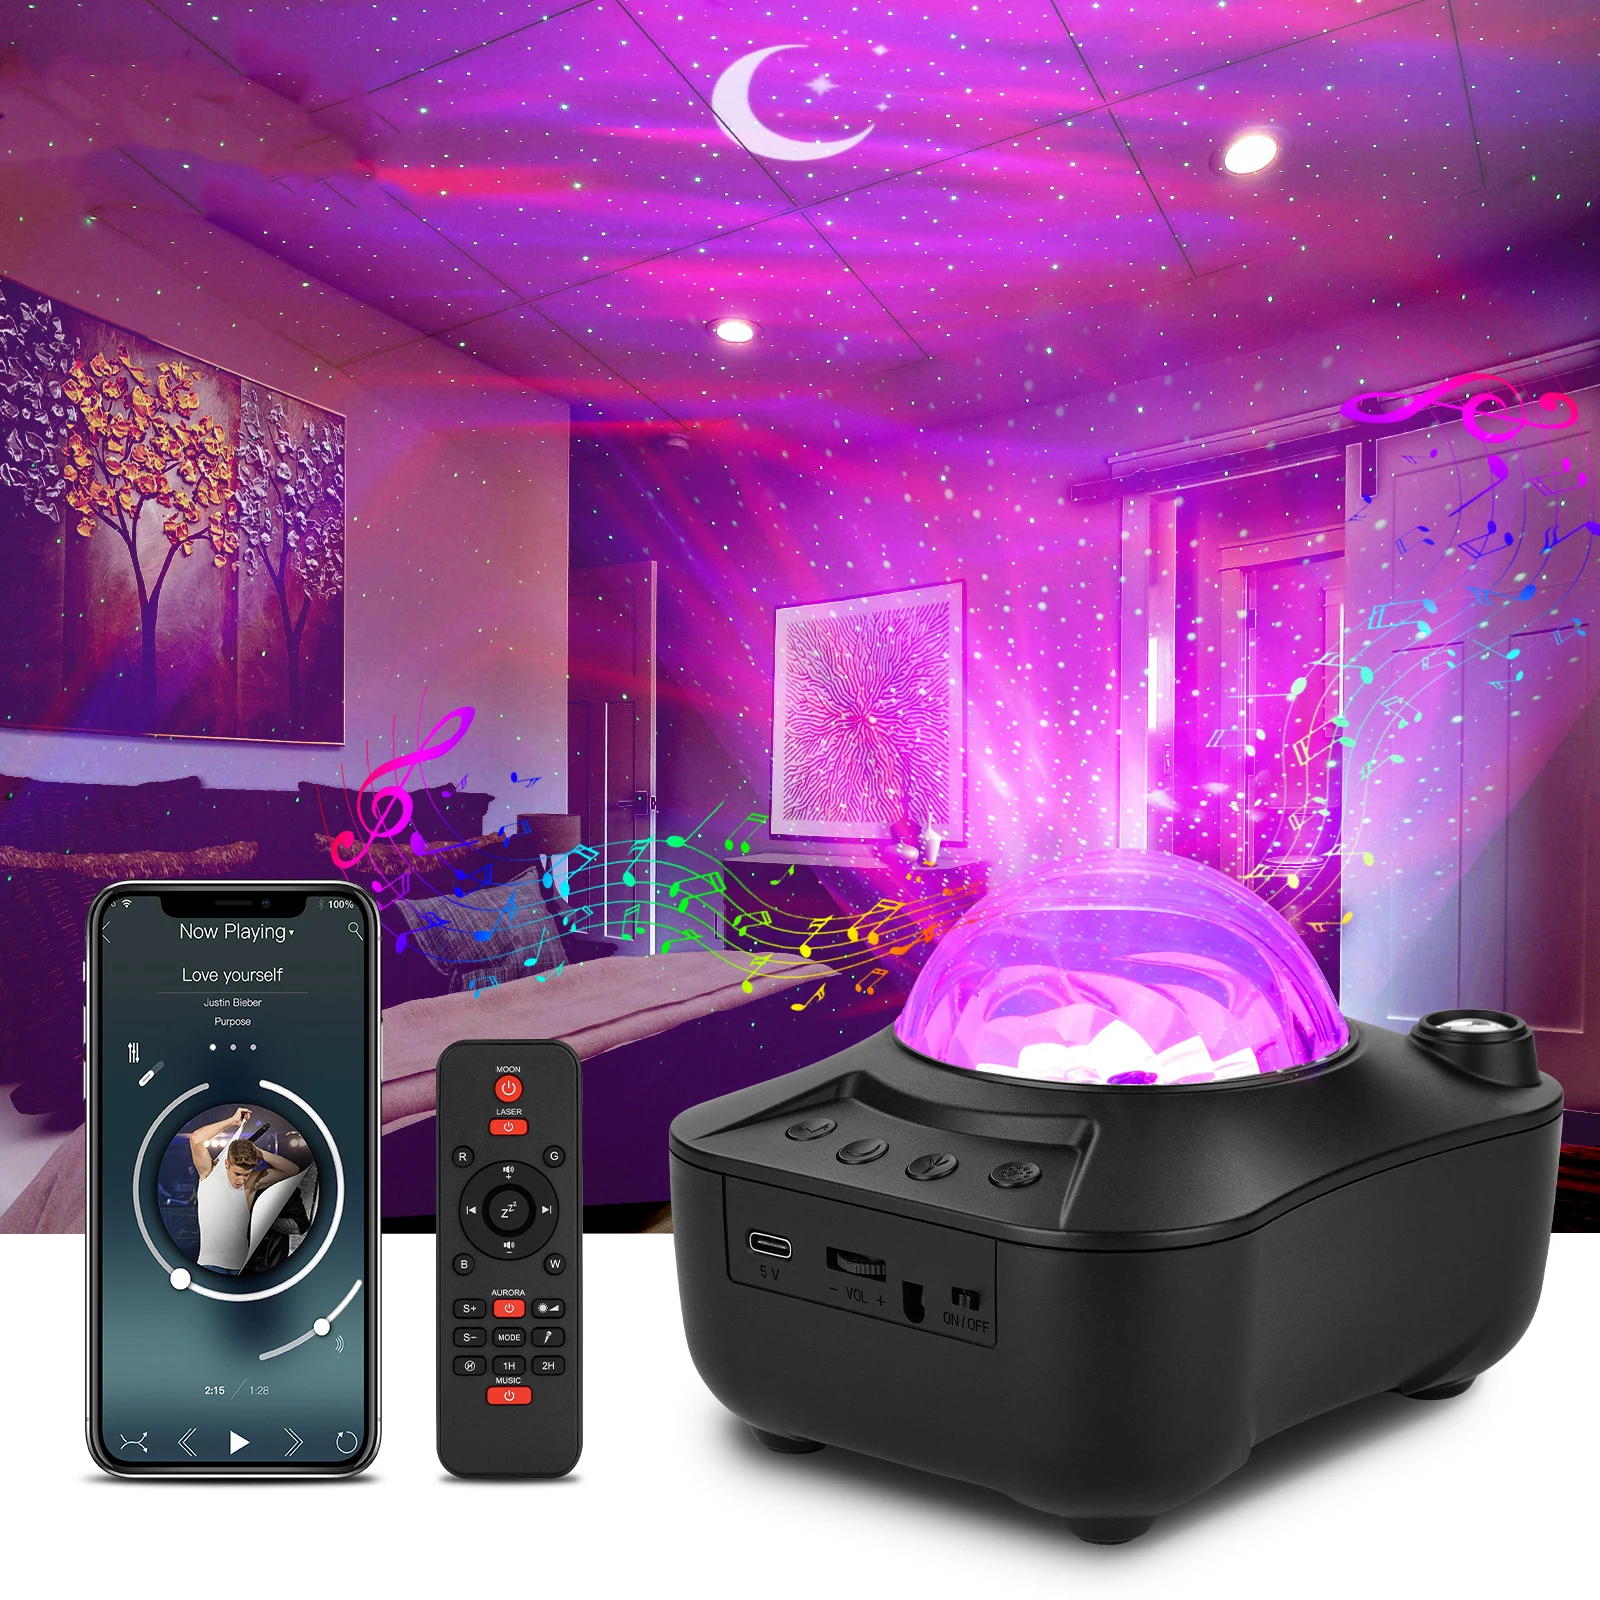 

Aurora Starry Sky Projector Galaxy Northern Light Ocean Wave Projection With White Noise Night Light Nebula Star Lamp Room Decor